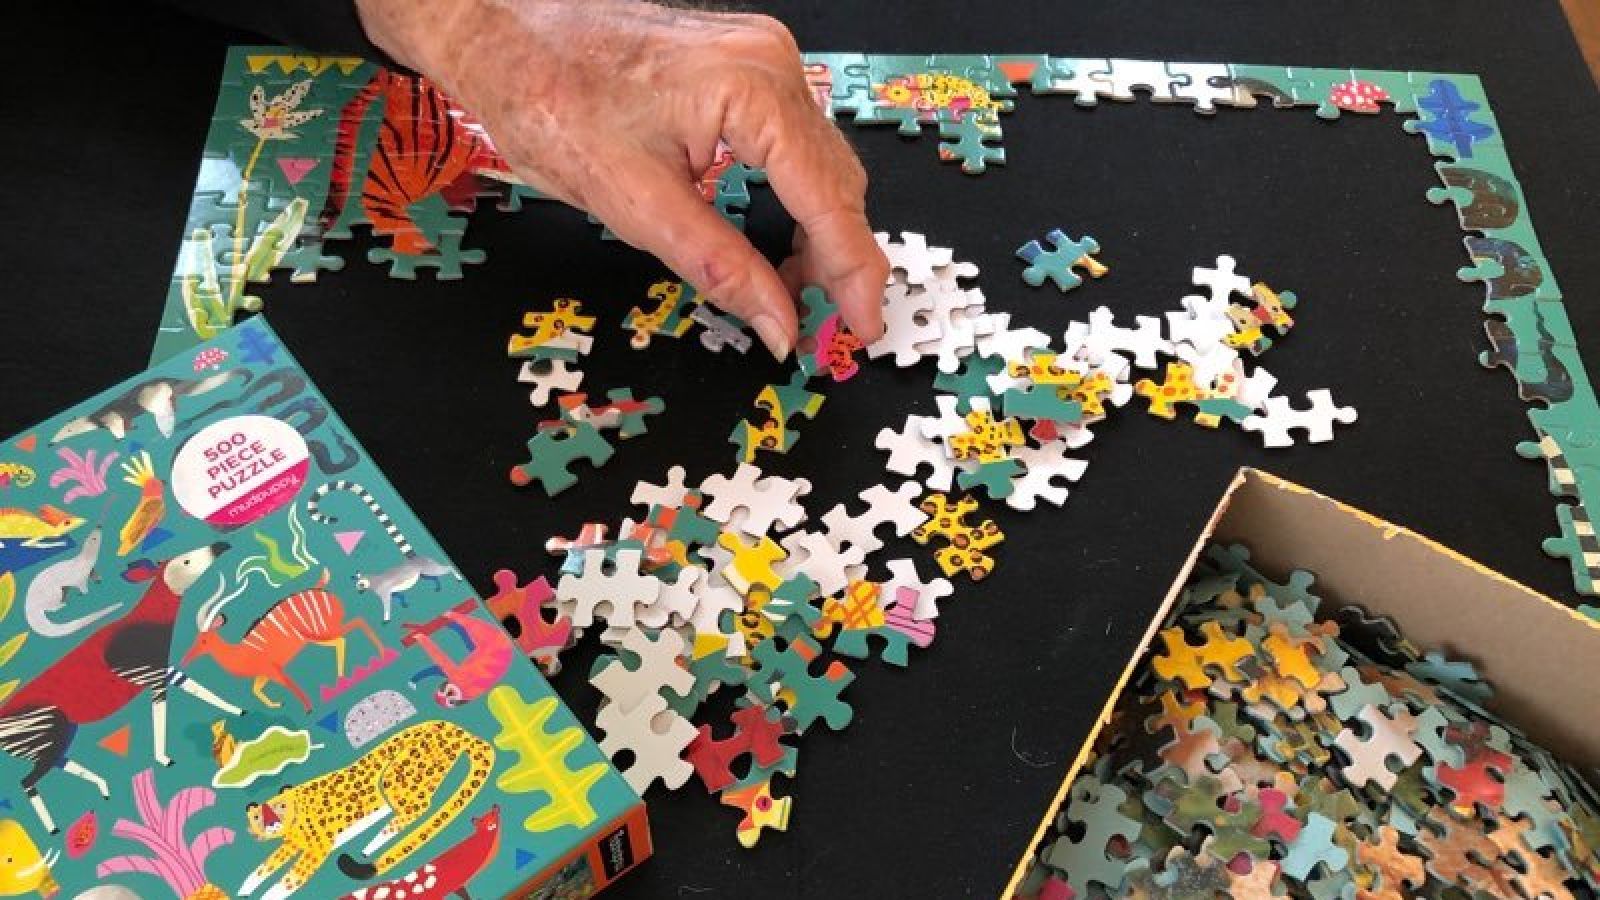 Puzzles are the analog way people are curbing their stay-at-home anxiety